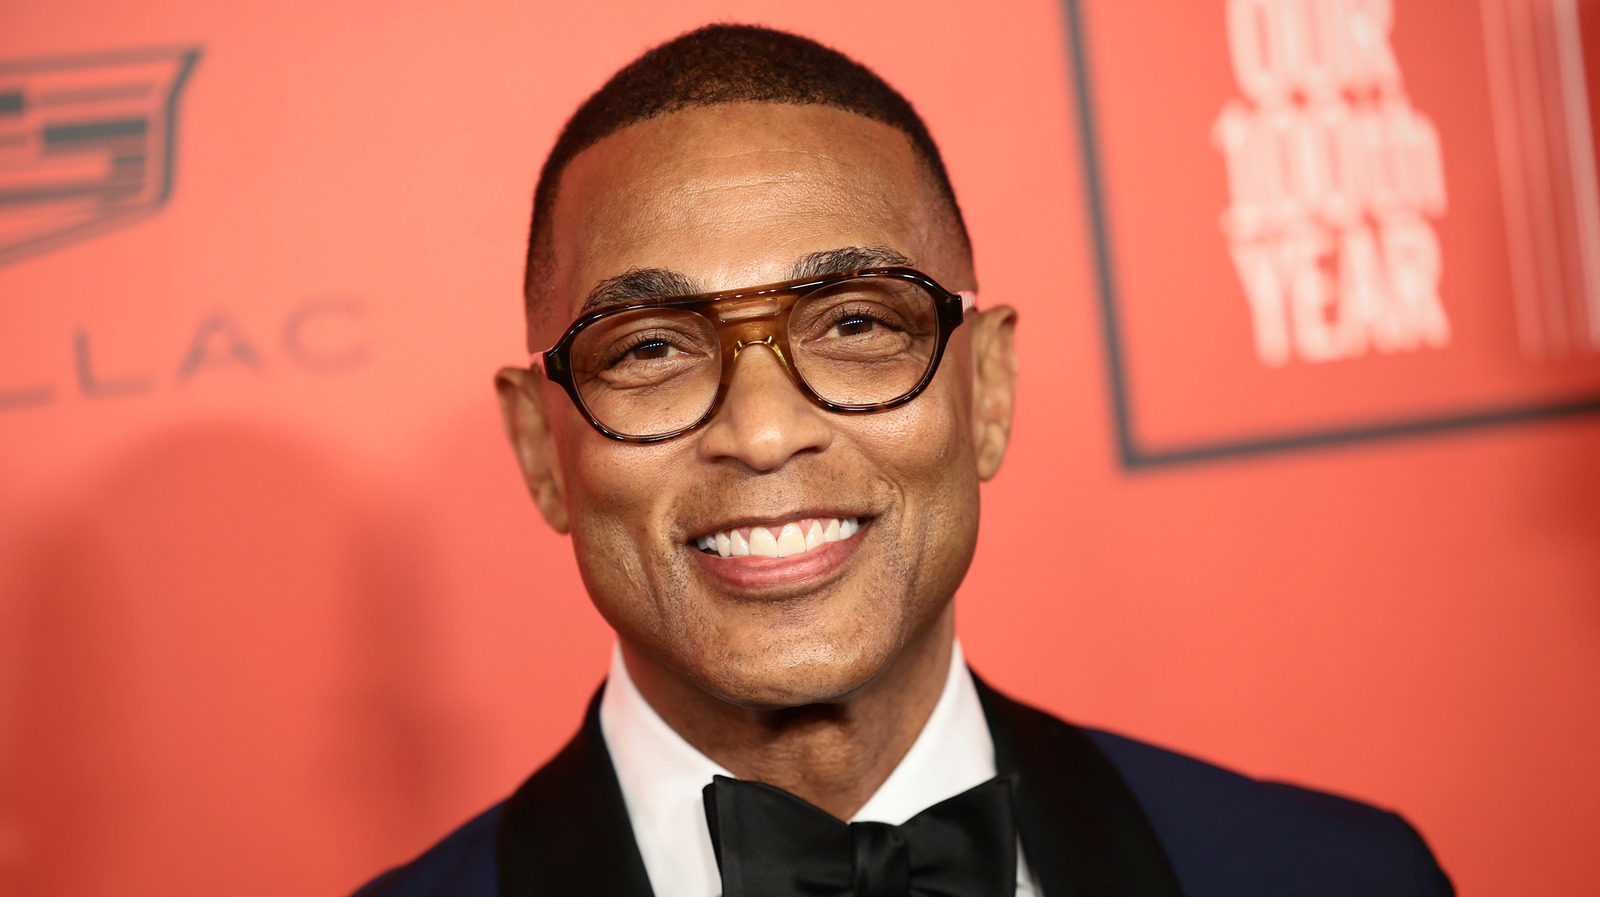 tv stars who are still close with don lemon after his cnn firing